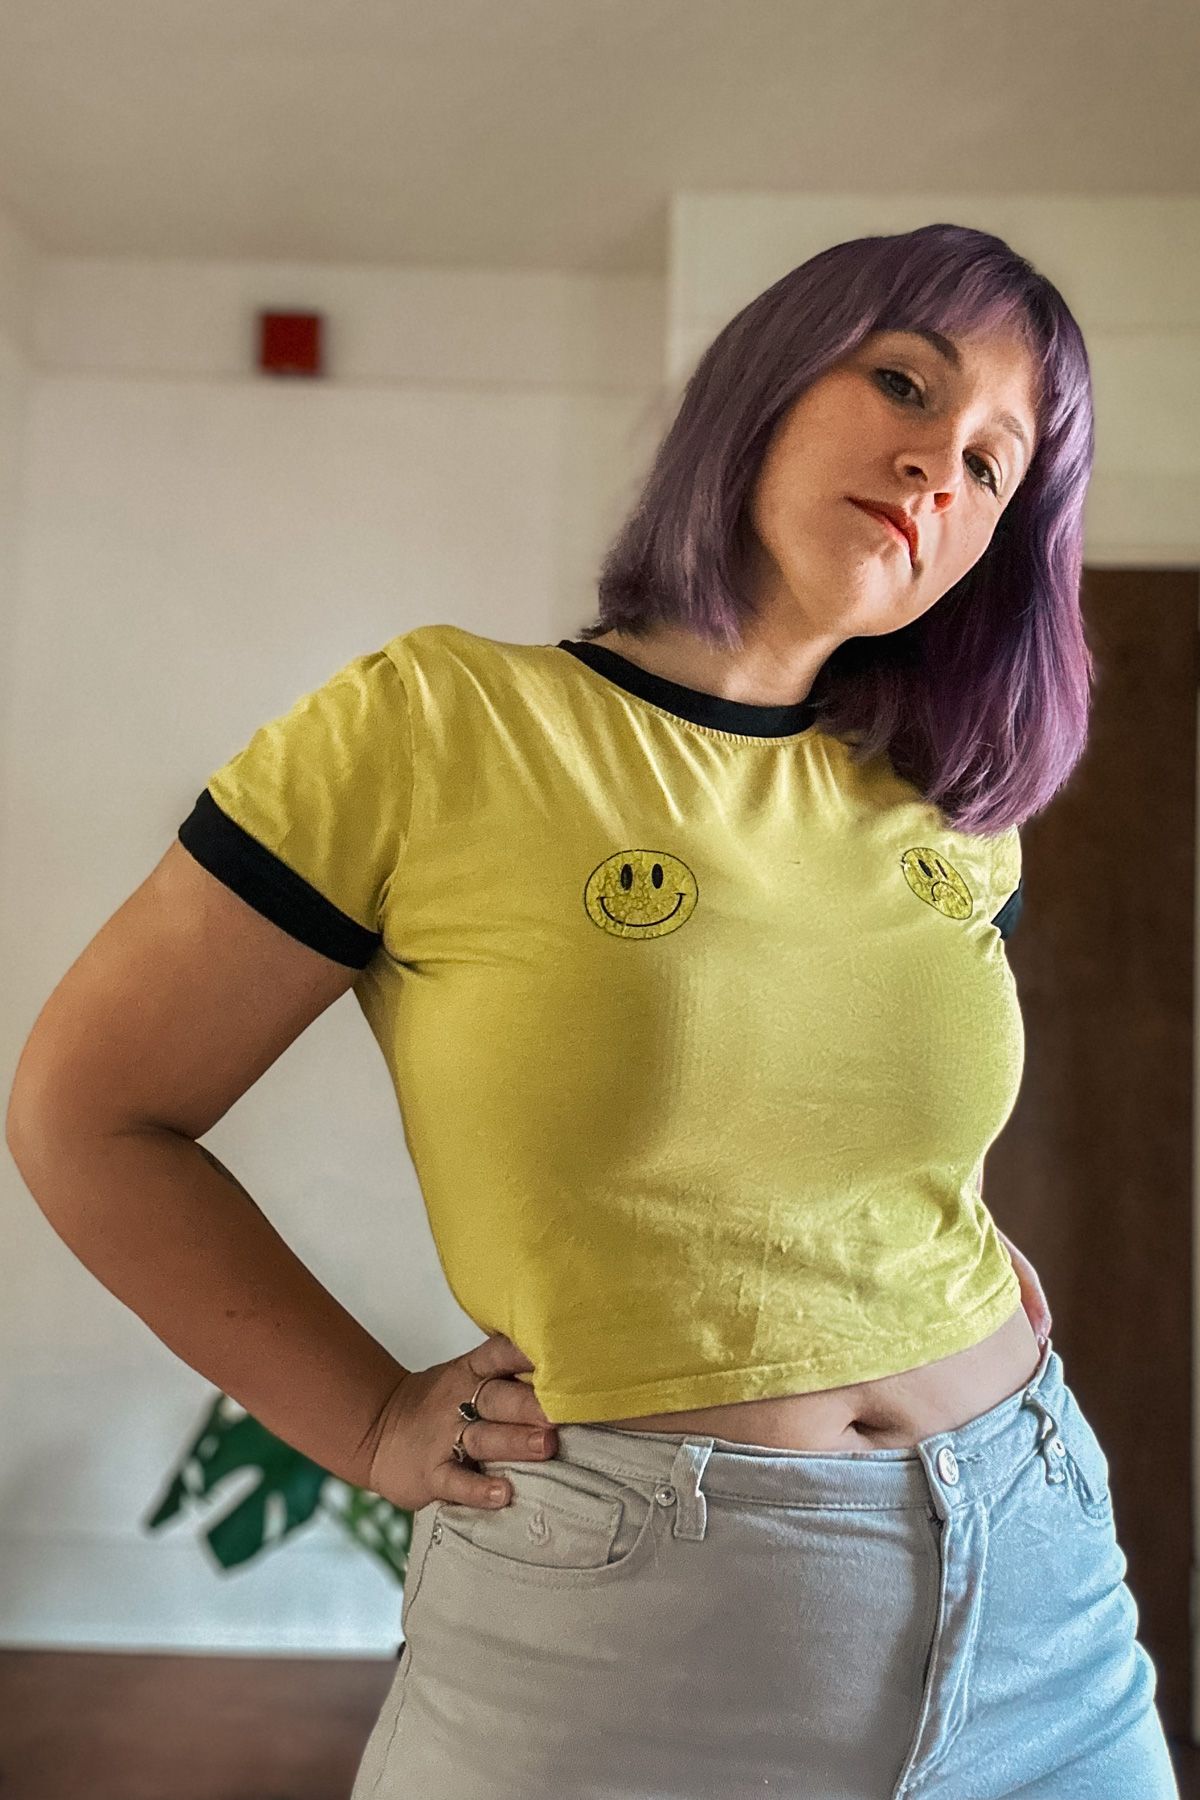 A woman with purple hair and a yellow t-shirt printed with a happy face and a sad face cocks her head to the side with a hand on her hip, a sparse interior in soft focus behind her.